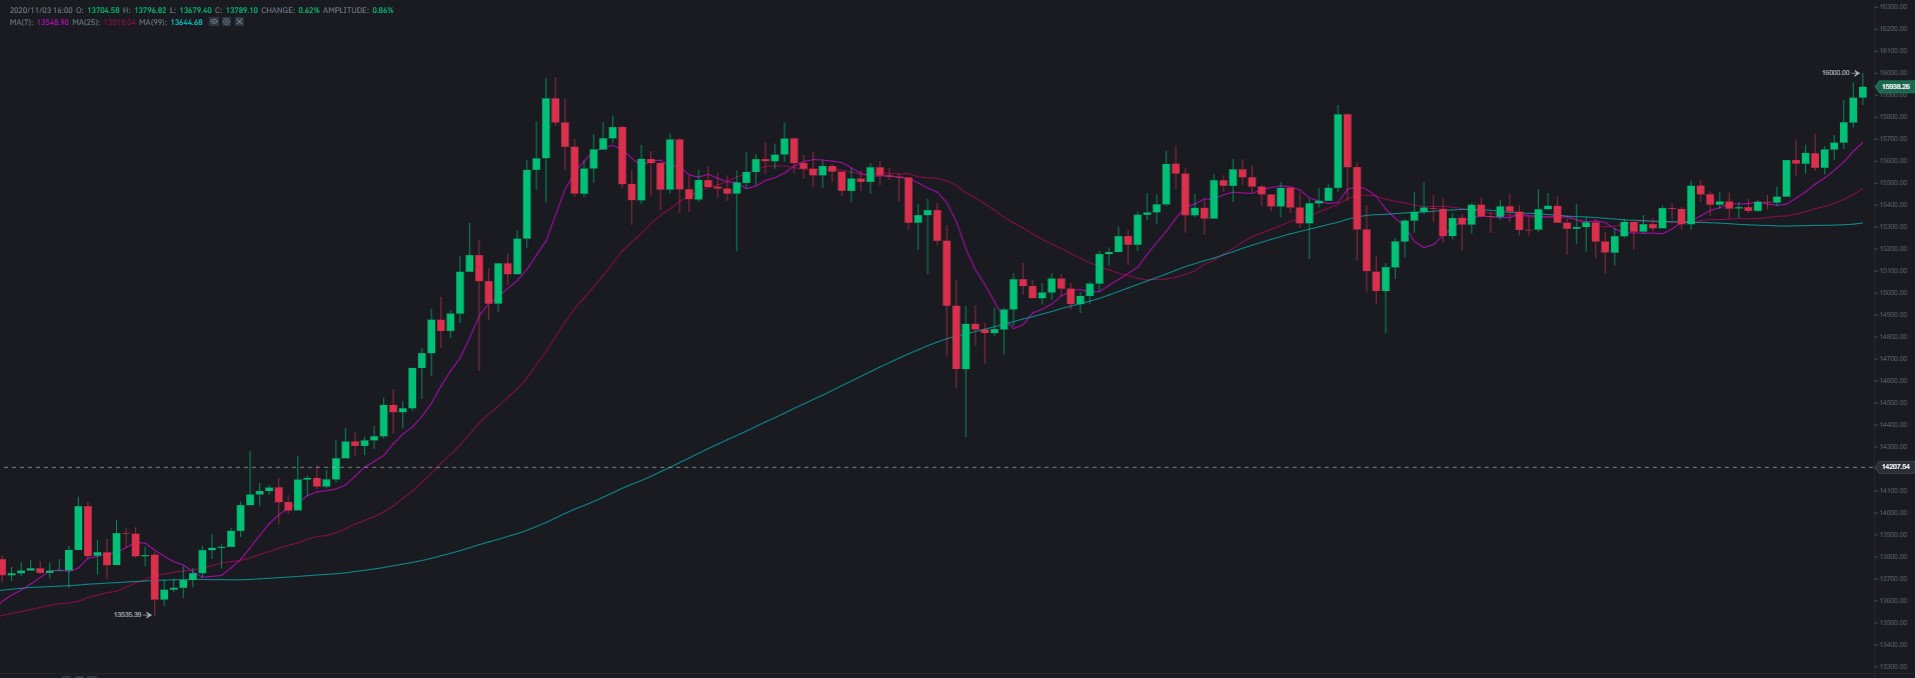 Bitcoin Hits $16K For a New 2020 Record: 325% Up Since March Yearly Low